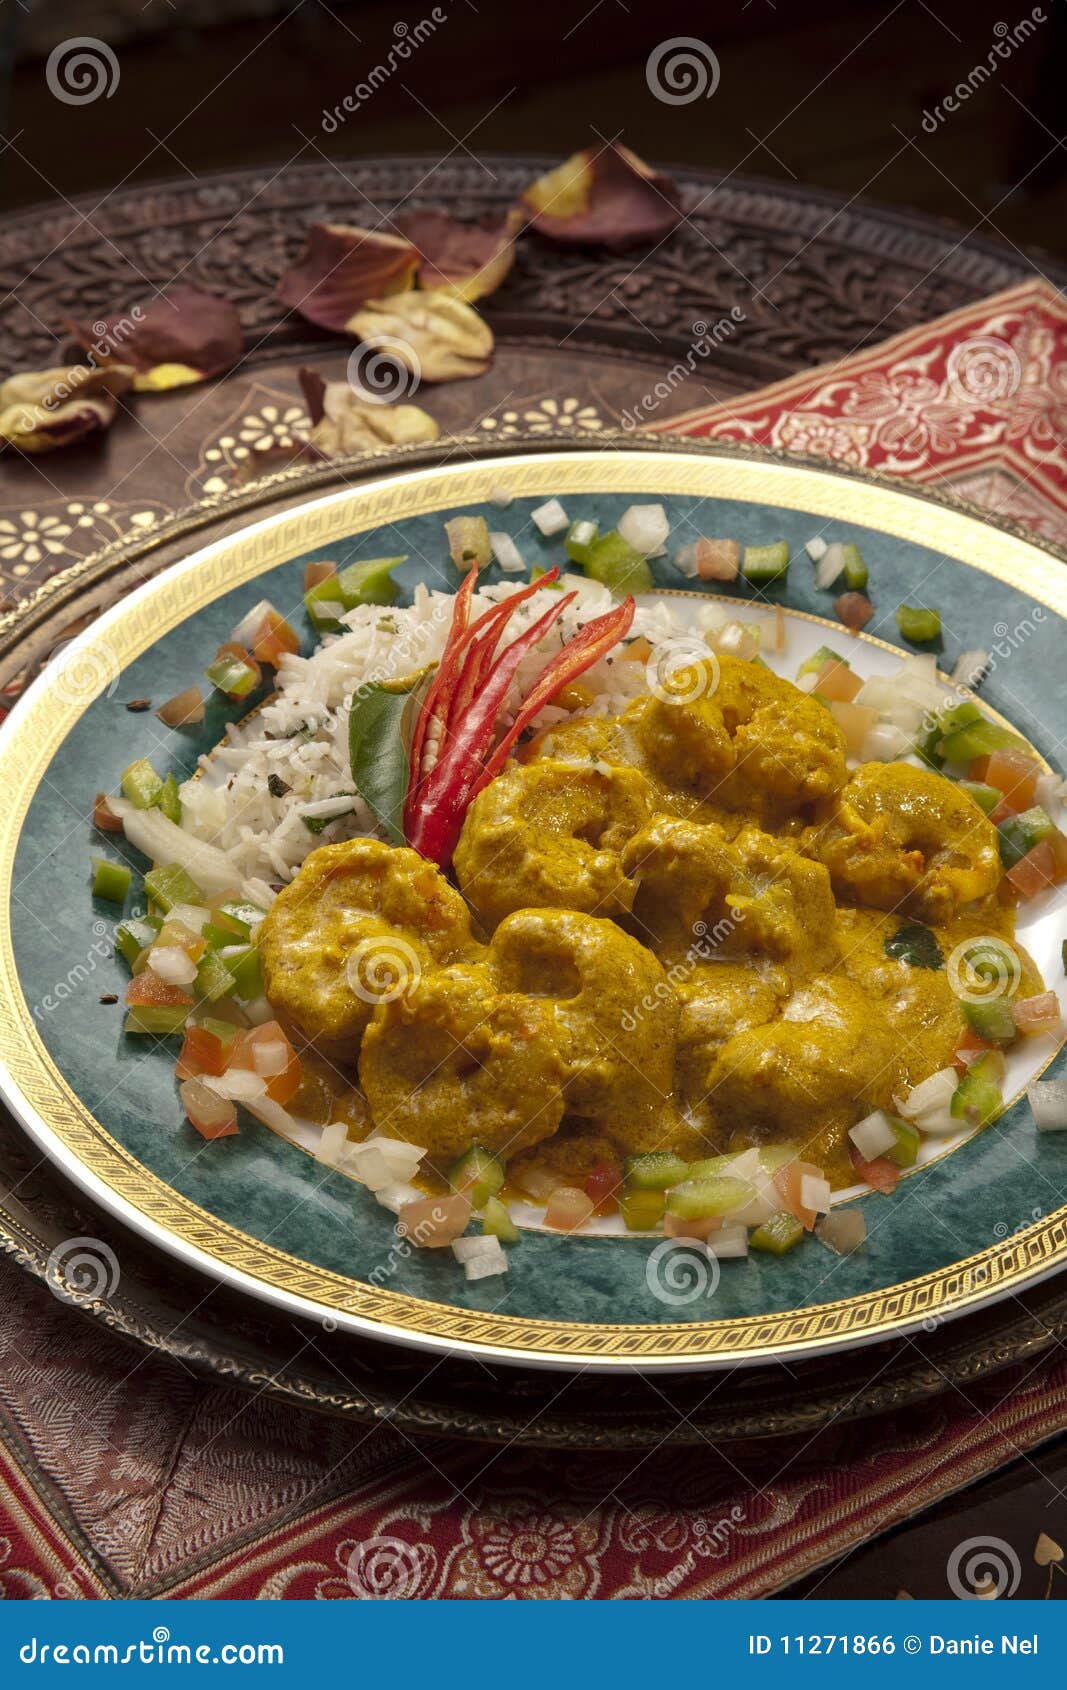 Indian chicken stew stock photo. Image of rice, table - 11271866